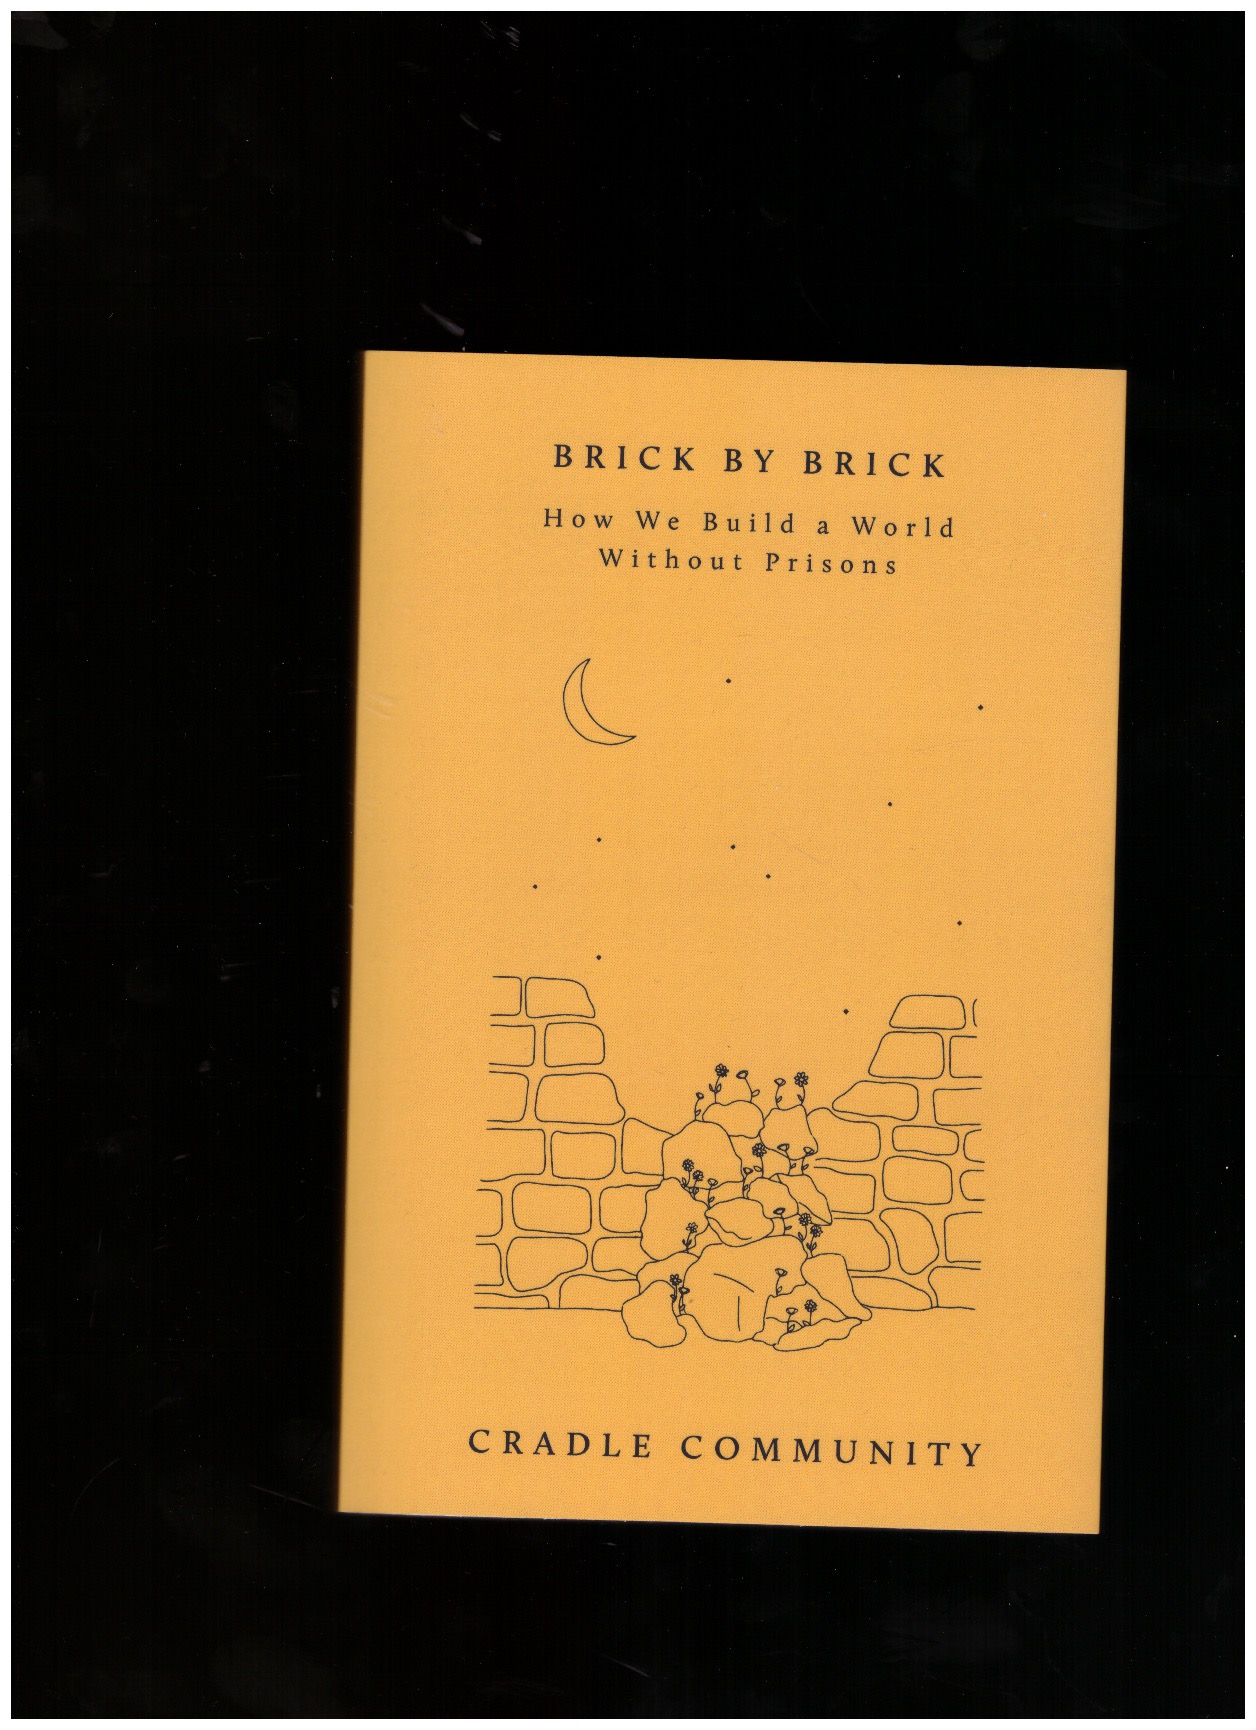 CRADLE COMMUNITY - Brick by Brick. How We Build a World Without Prisons